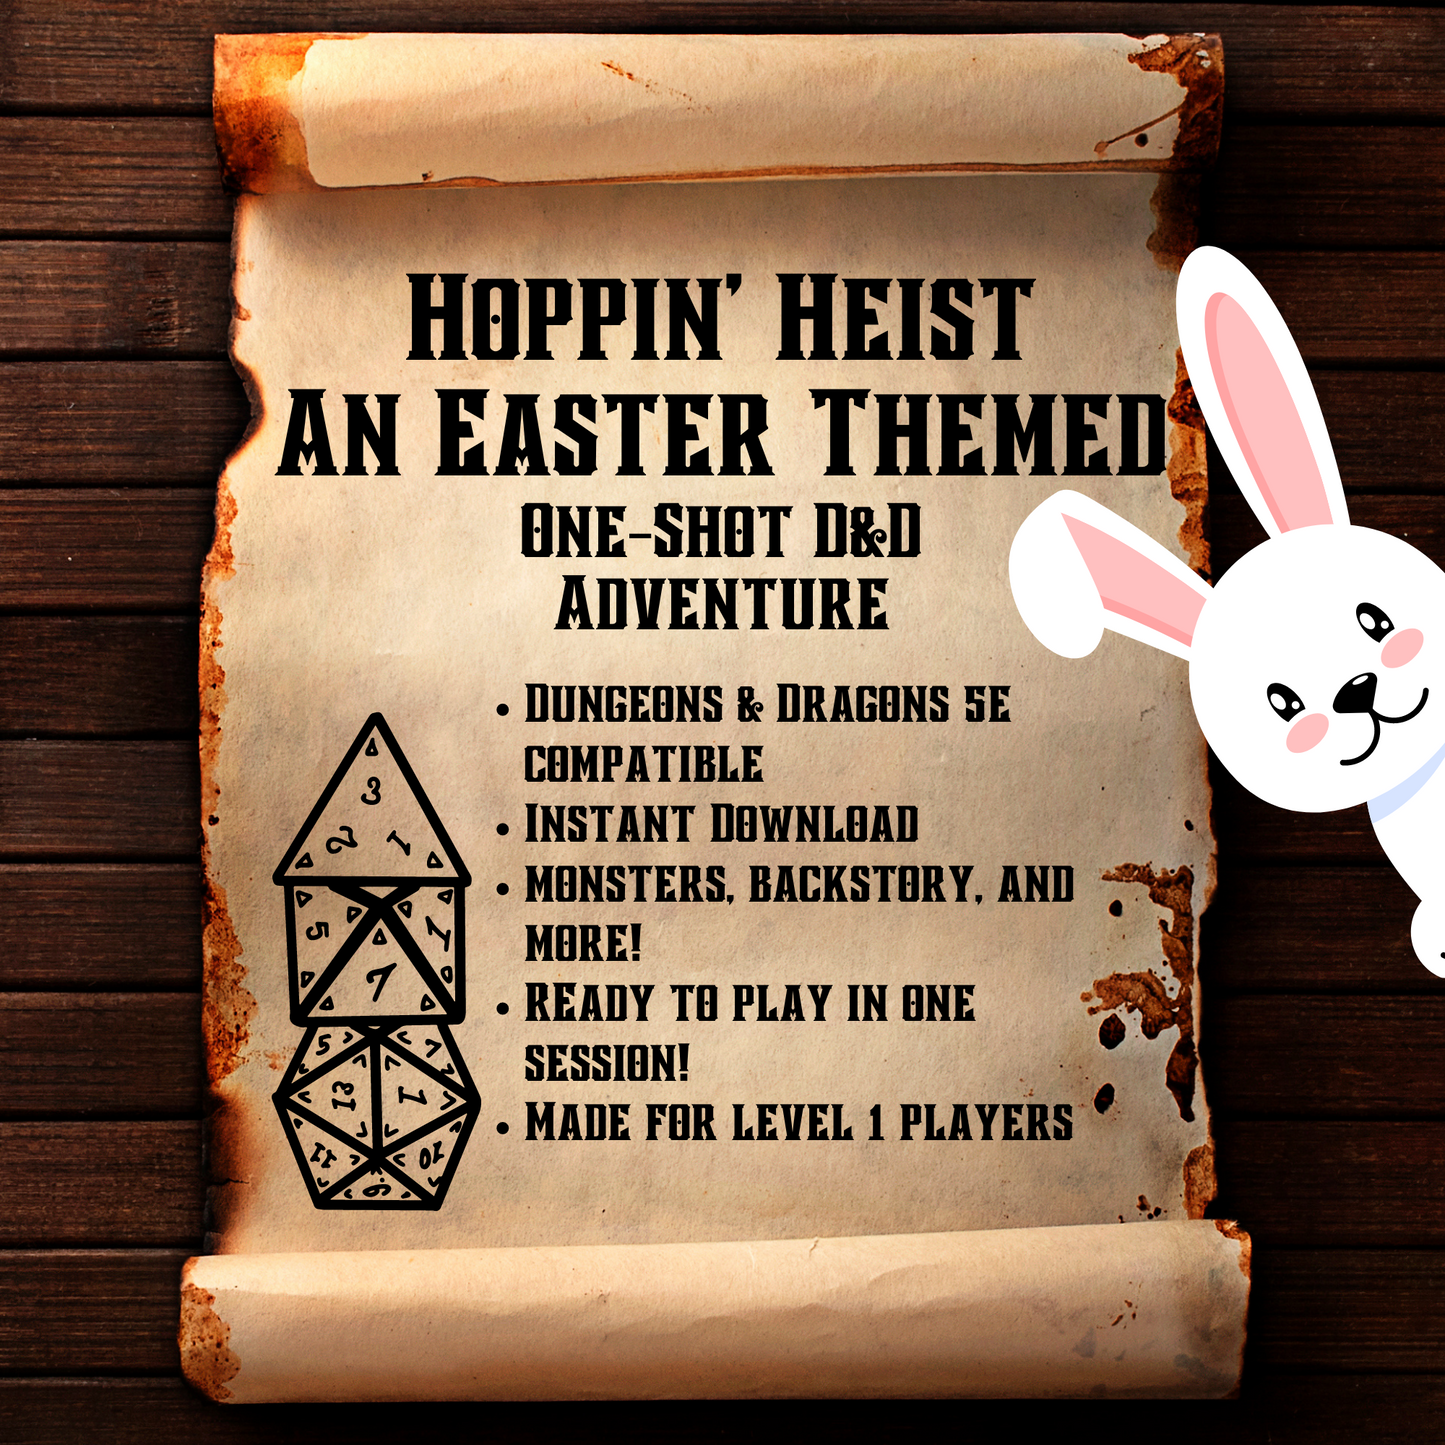 Hoppin' Heist- An Easter D&D One-Shot Adventure for Level 2-5 Characters